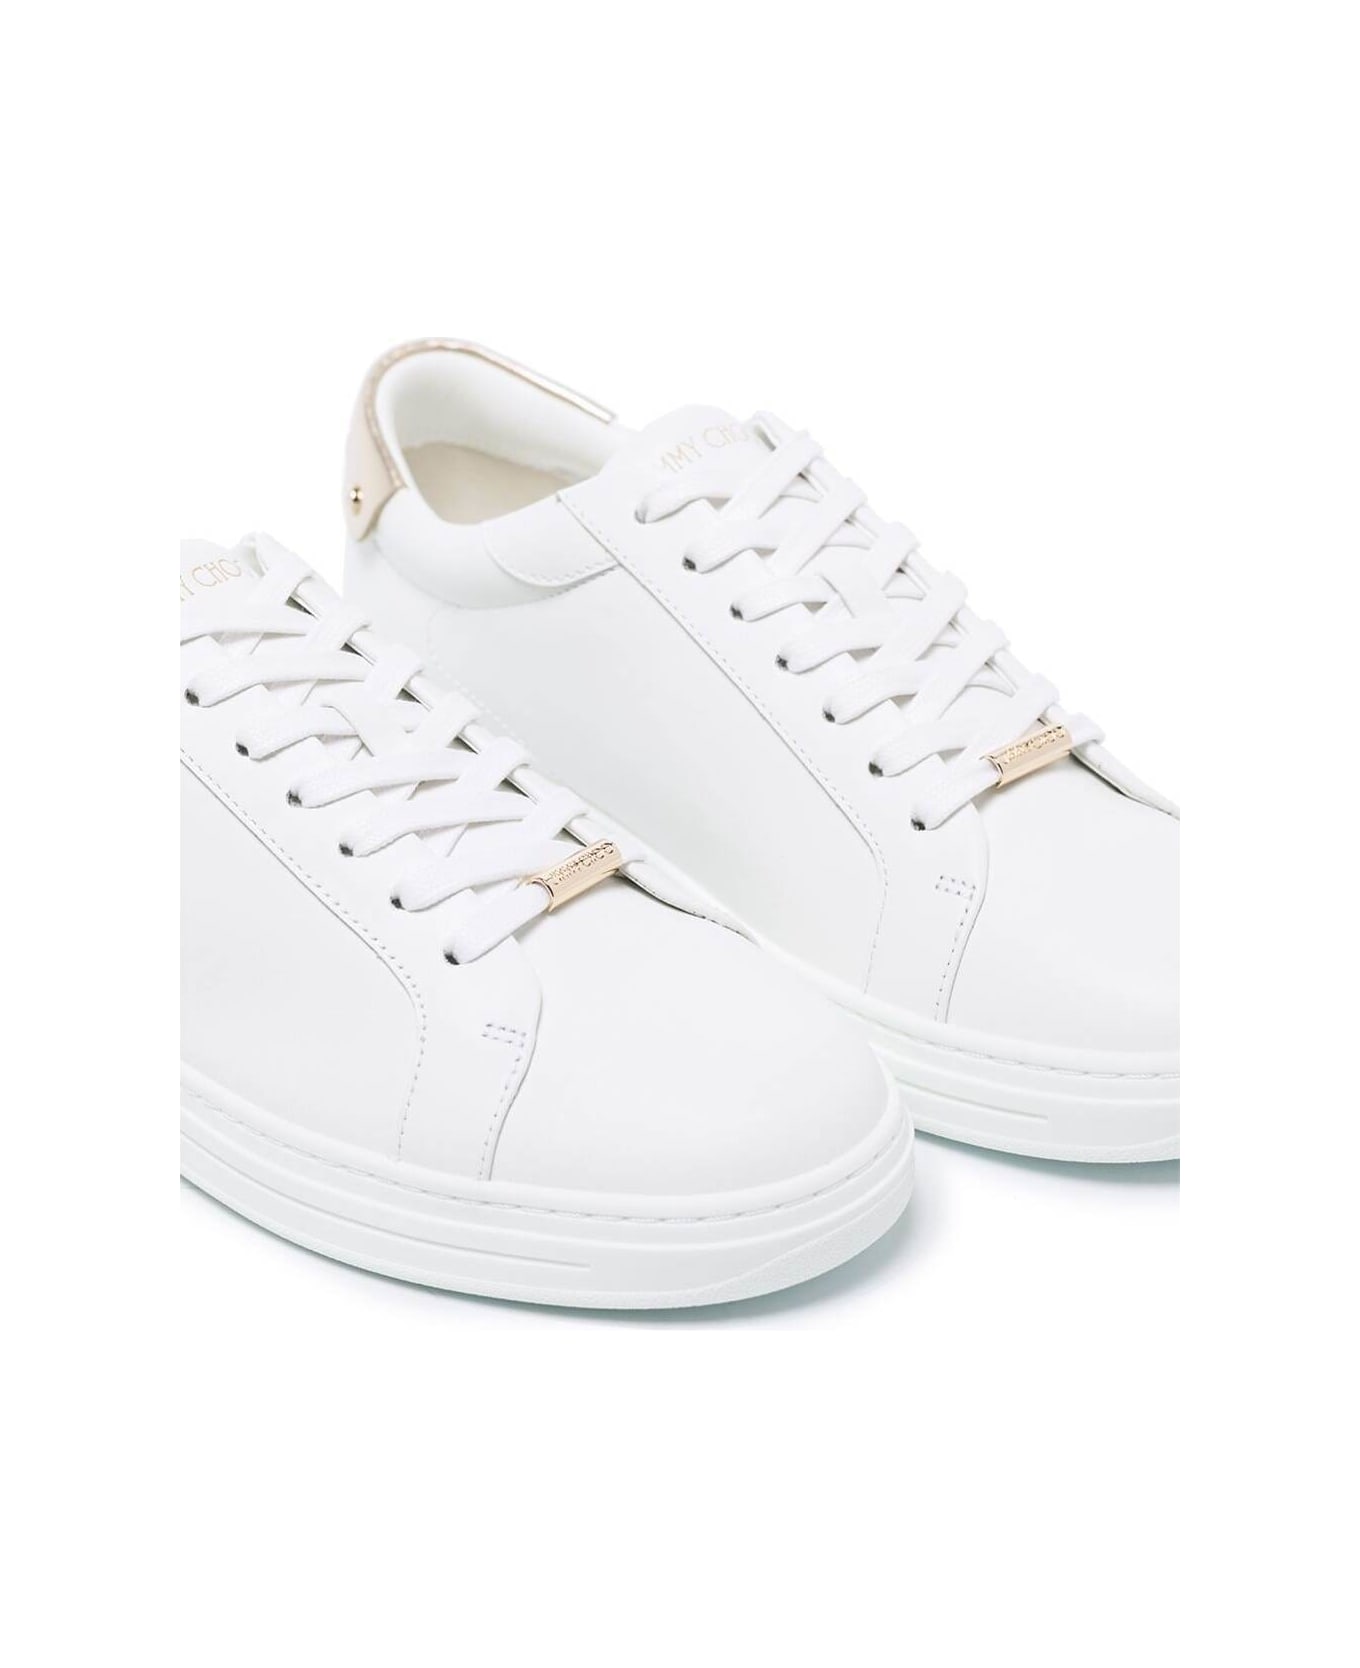 Jimmy Choo Woman's Rome White Leather Sneakers - White